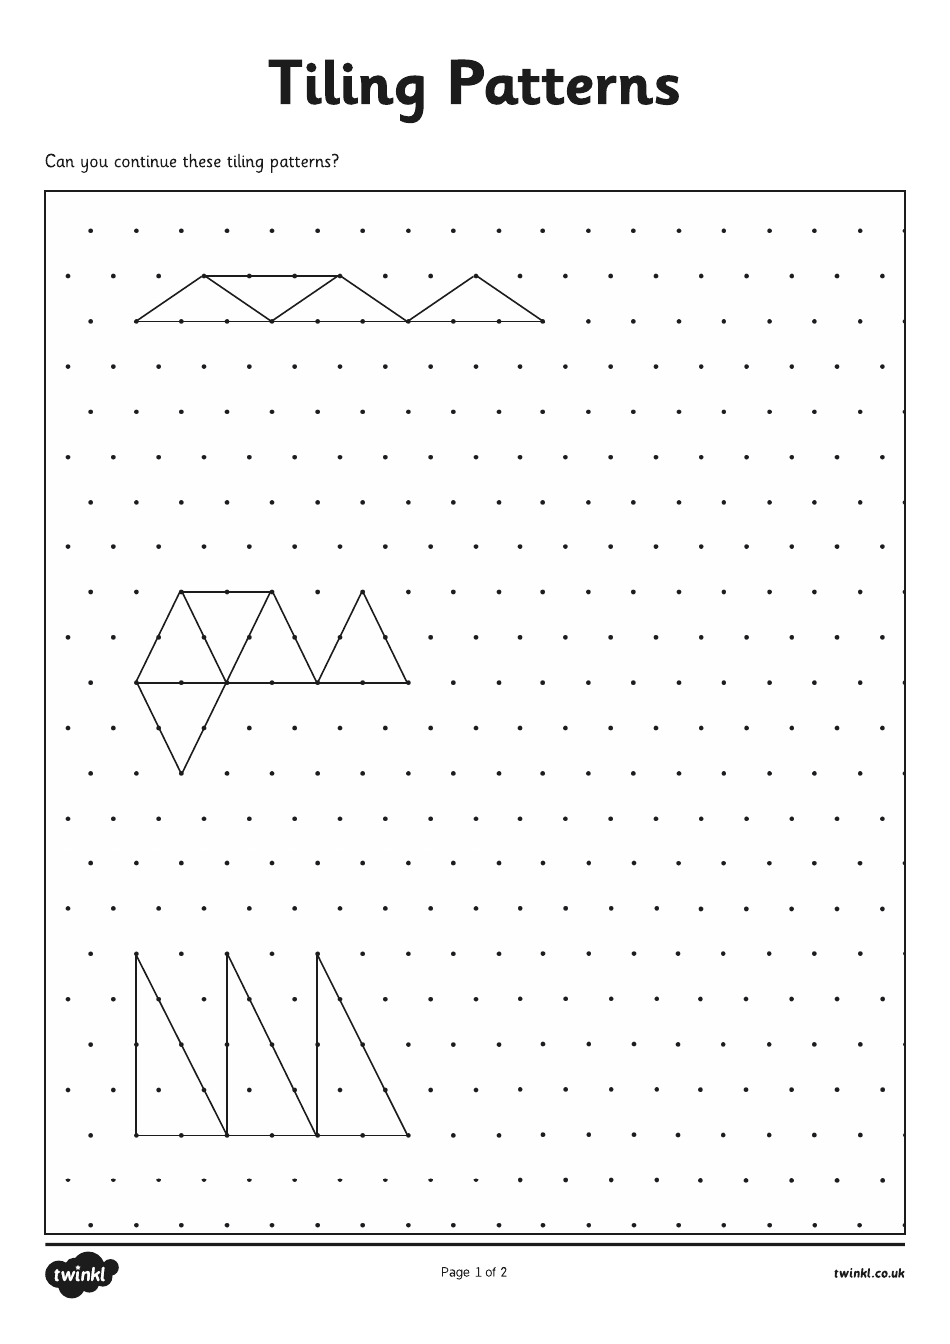 Tiling Patterns on Isometric Dot Paper, Page 1